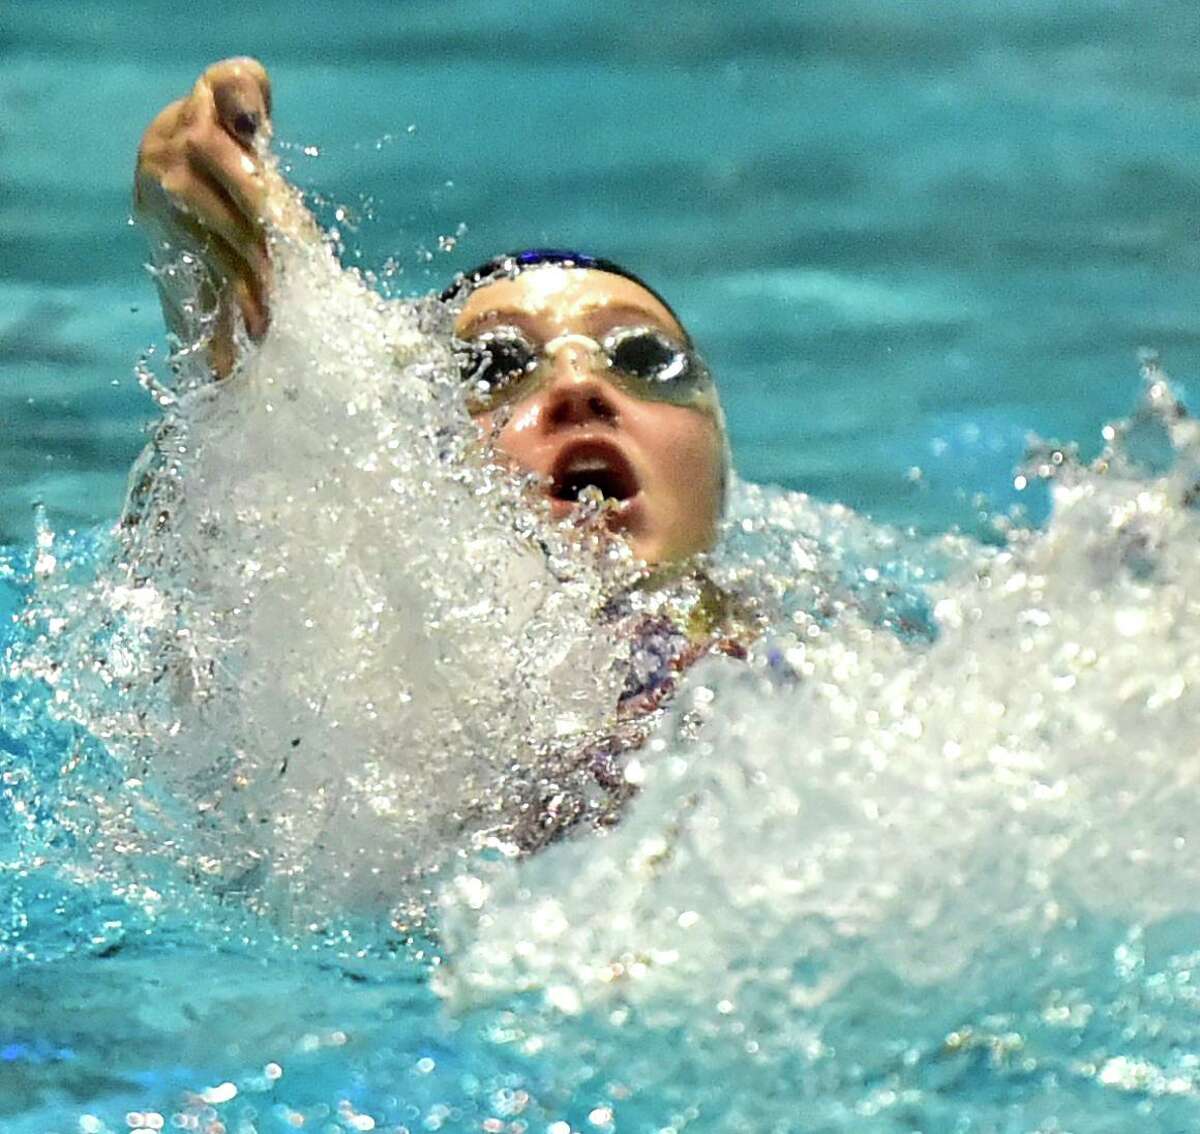 Samantha Ennis of Greenwich High swims the backstroke in the 200 Yard Medley Relay during the CIAC State Open Girls Swimming Championship on Nov. 24 at Yale University in New Haven. Ennis is a senior co-captain.